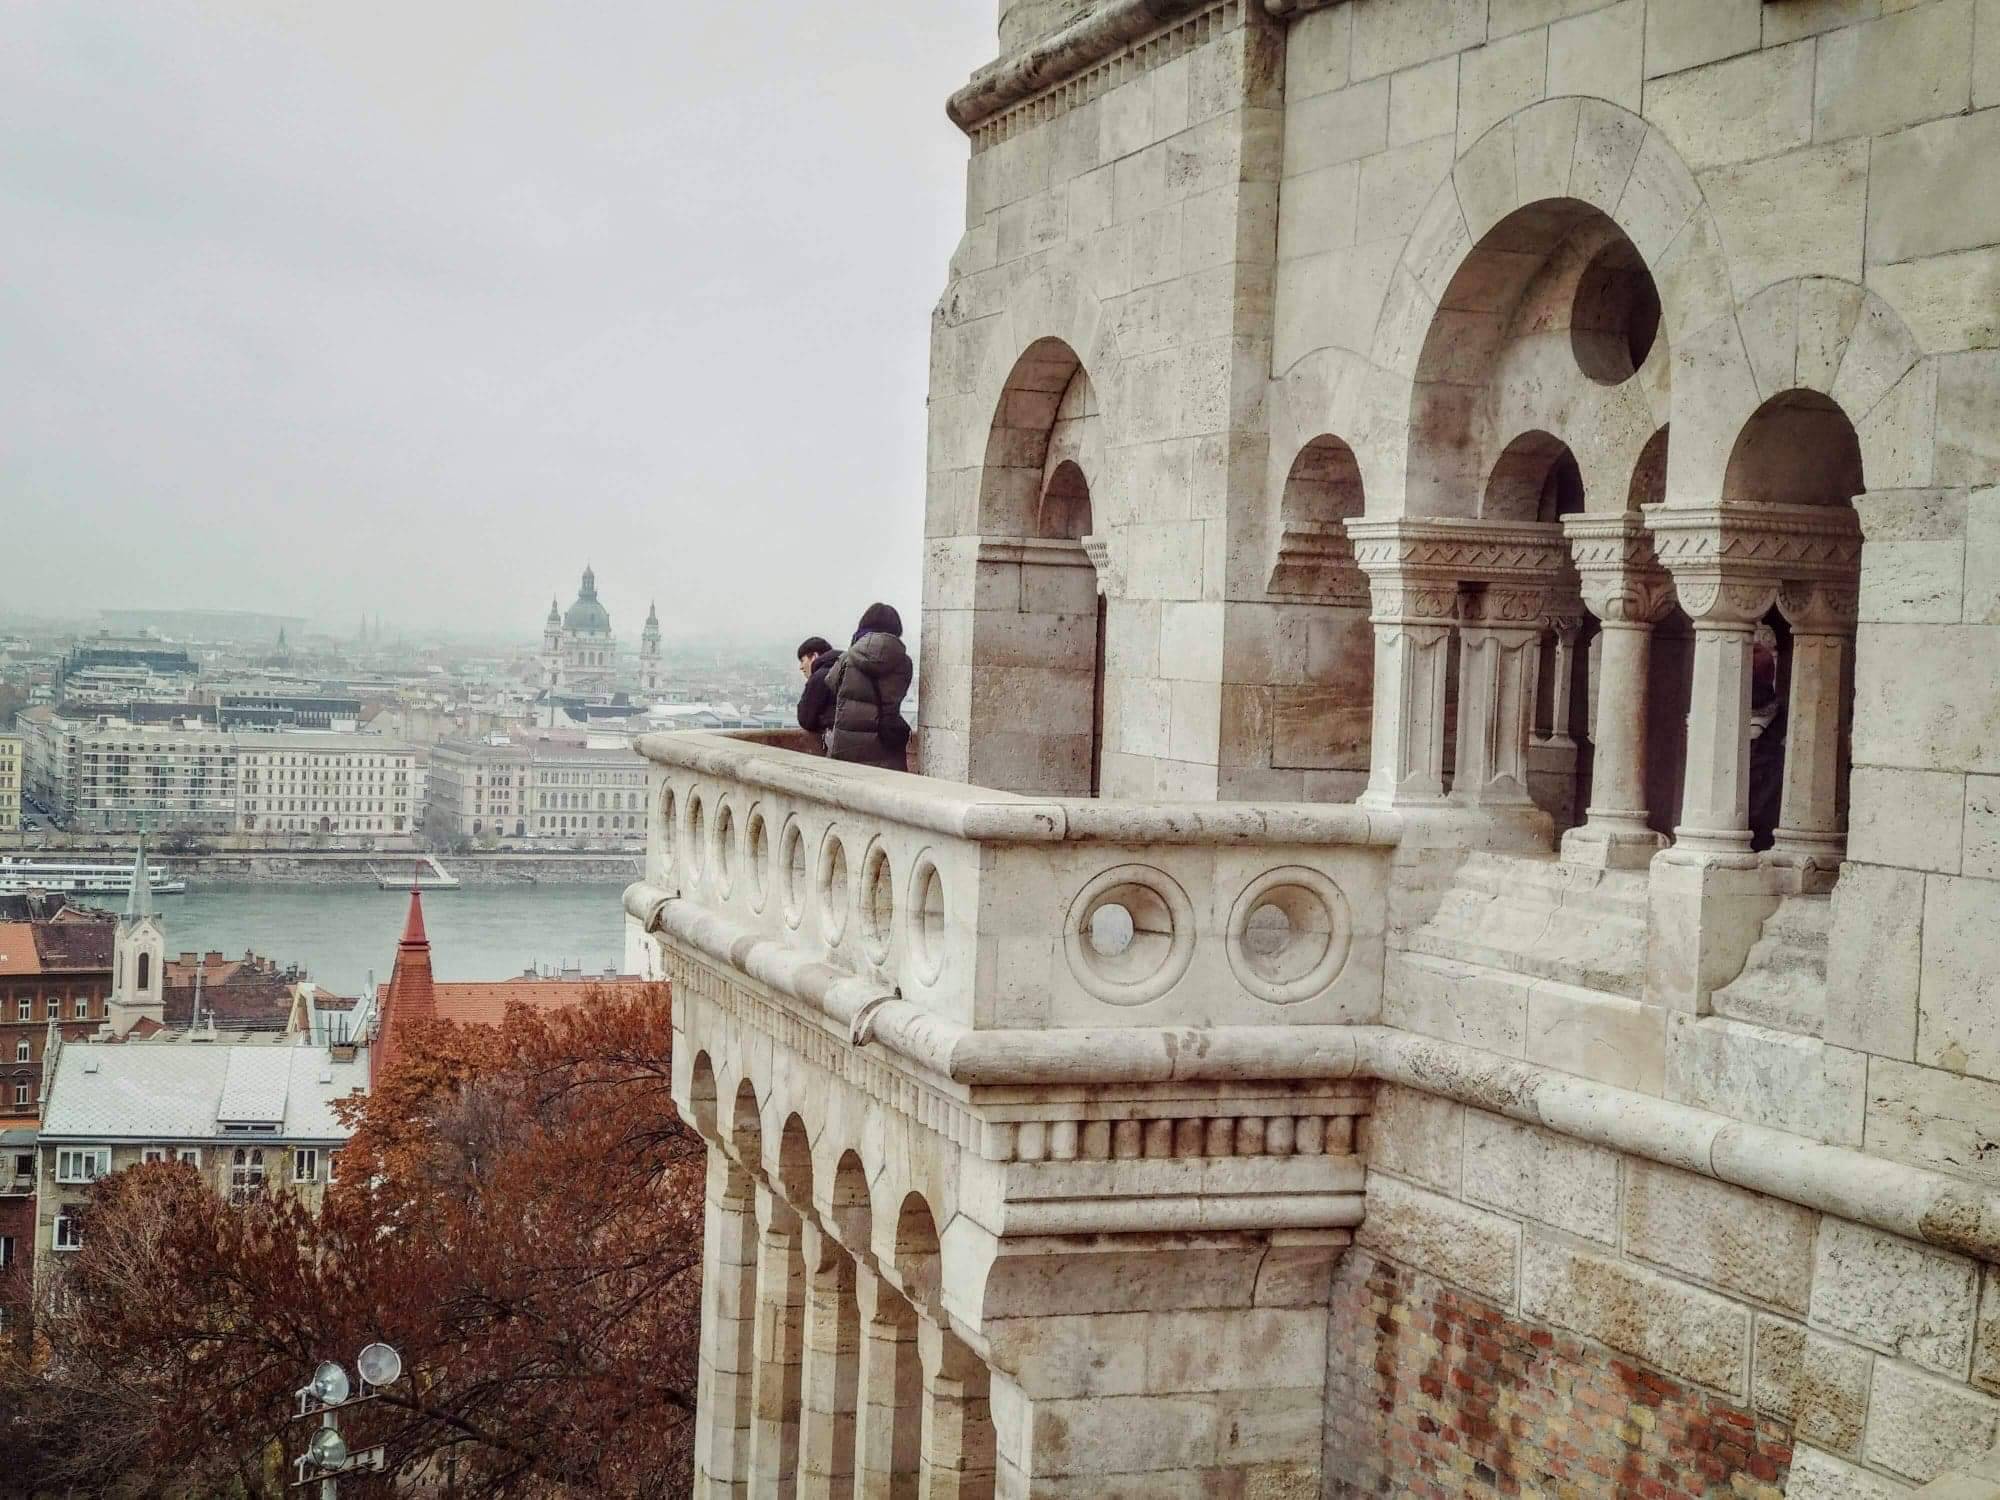 The magnificent view of autumn Budapest is breathtaking!